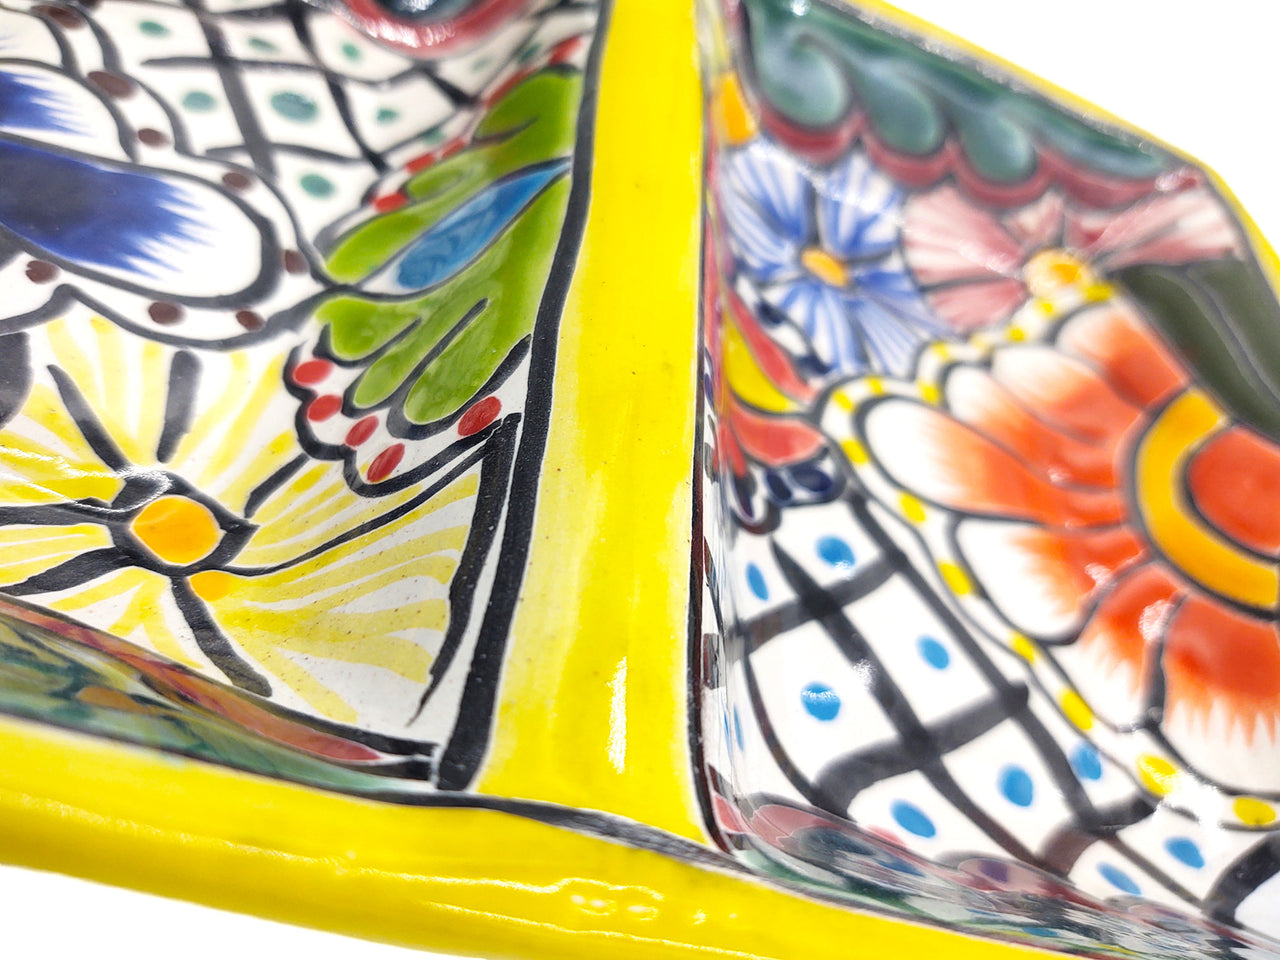 Mexican Talavera Ceramic Divided Serving Dish - Dual Section, 10" Tableware Authentic Décor for Dining & Entertaining, Hand Painted - Yellow Trim